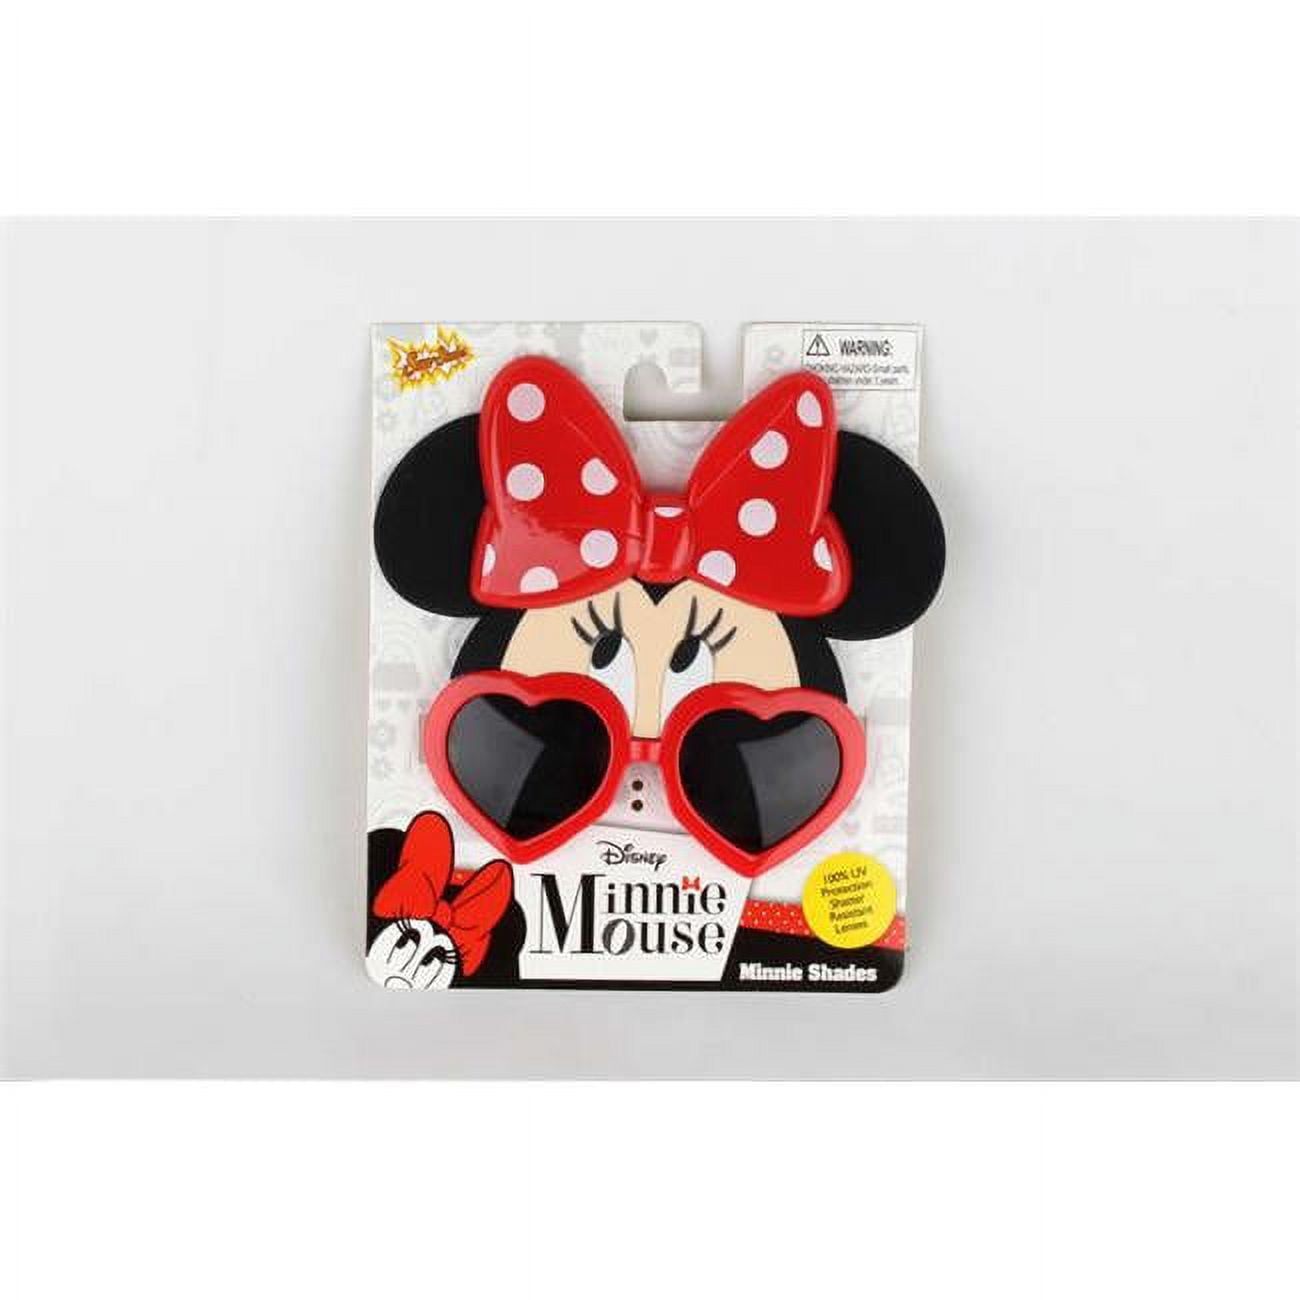 Picture of Sunstaches SG2568 Minnie Mouse Eyes Heart Frame Novelty Sunglasses